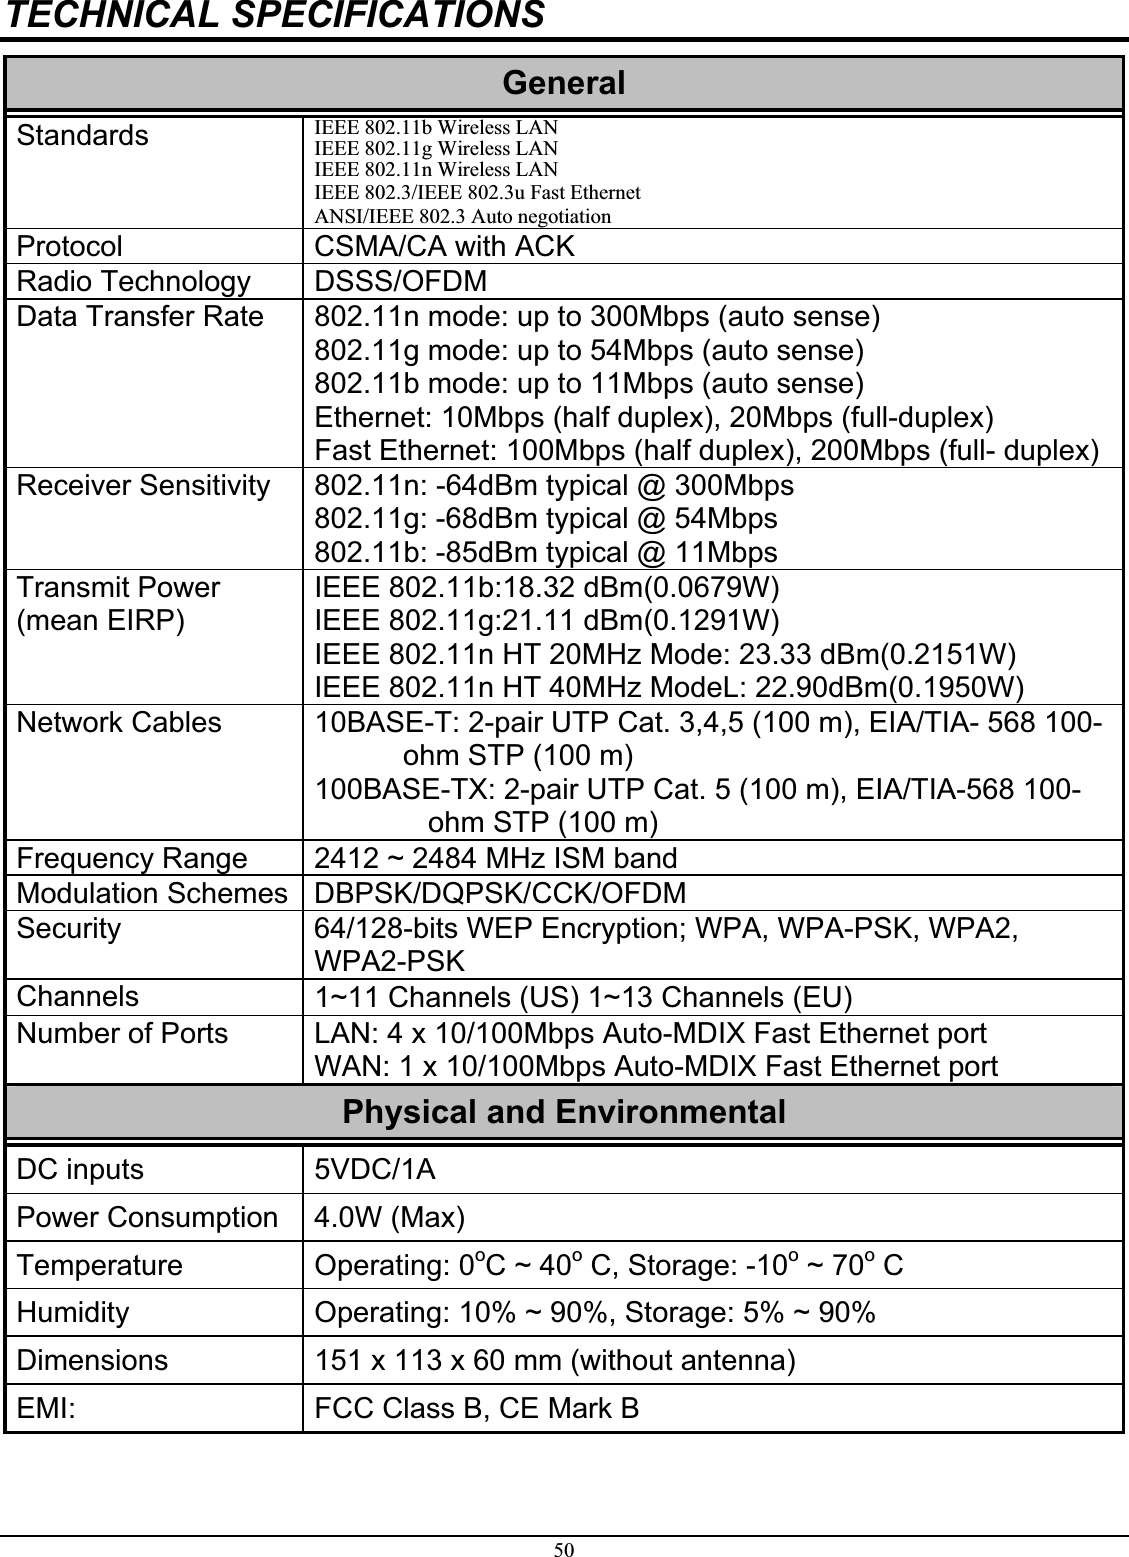 50TECHNICAL SPECIFICATIONS GeneralStandards IEEE 802.11b Wireless LAN IEEE 802.11g Wireless LAN IEEE 802.11n Wireless LAN IEEE 802.3/IEEE 802.3u Fast Ethernet ANSI/IEEE 802.3 Auto negotiationProtocol  CSMA/CA with ACK Radio Technology  DSSS/OFDM Data Transfer Rate  802.11n mode: up to 300Mbps (auto sense) 802.11g mode: up to 54Mbps (auto sense) 802.11b mode: up to 11Mbps (auto sense) Ethernet: 10Mbps (half duplex), 20Mbps (full-duplex) Fast Ethernet: 100Mbps (half duplex), 200Mbps (full- duplex) Receiver Sensitivity  802.11n: -64dBm typical @ 300Mbps 802.11g: -68dBm typical @ 54Mbps 802.11b: -85dBm typical @ 11Mbps Transmit Power (mean EIRP) IEEE 802.11b:18.32 dBm(0.0679W)IEEE 802.11g:21.11 dBm(0.1291W)IEEE 802.11n HT 20MHz Mode: 23.33 dBm(0.2151W)IEEE 802.11n HT 40MHz ModeL: 22.90dBm(0.1950W)Network Cables  10BASE-T: 2-pair UTP Cat. 3,4,5 (100 m), EIA/TIA- 568 100-ohm STP (100 m) 100BASE-TX: 2-pair UTP Cat. 5 (100 m), EIA/TIA-568 100-ohm STP (100 m) Frequency Range  2412 ~ 2484 MHz ISM band  Modulation Schemes  DBPSK/DQPSK/CCK/OFDMSecurity  64/128-bits WEP Encryption; WPA, WPA-PSK, WPA2, WPA2-PSK Channels 1~11 Channels (US) 1~13 Channels (EU) Number of Ports  LAN: 4 x 10/100Mbps Auto-MDIX Fast Ethernet port WAN: 1 x 10/100Mbps Auto-MDIX Fast Ethernet port Physical and EnvironmentalDC inputs  5VDC/1A Power Consumption  4.0W (Max) Temperature Operating: 0oC ~ 40o C, Storage: -10o ~ 70o C Humidity  Operating: 10% ~ 90%, Storage: 5% ~ 90% Dimensions 151 x 113 x 60 mm (without antenna)EMI:  FCC Class B, CE Mark B  